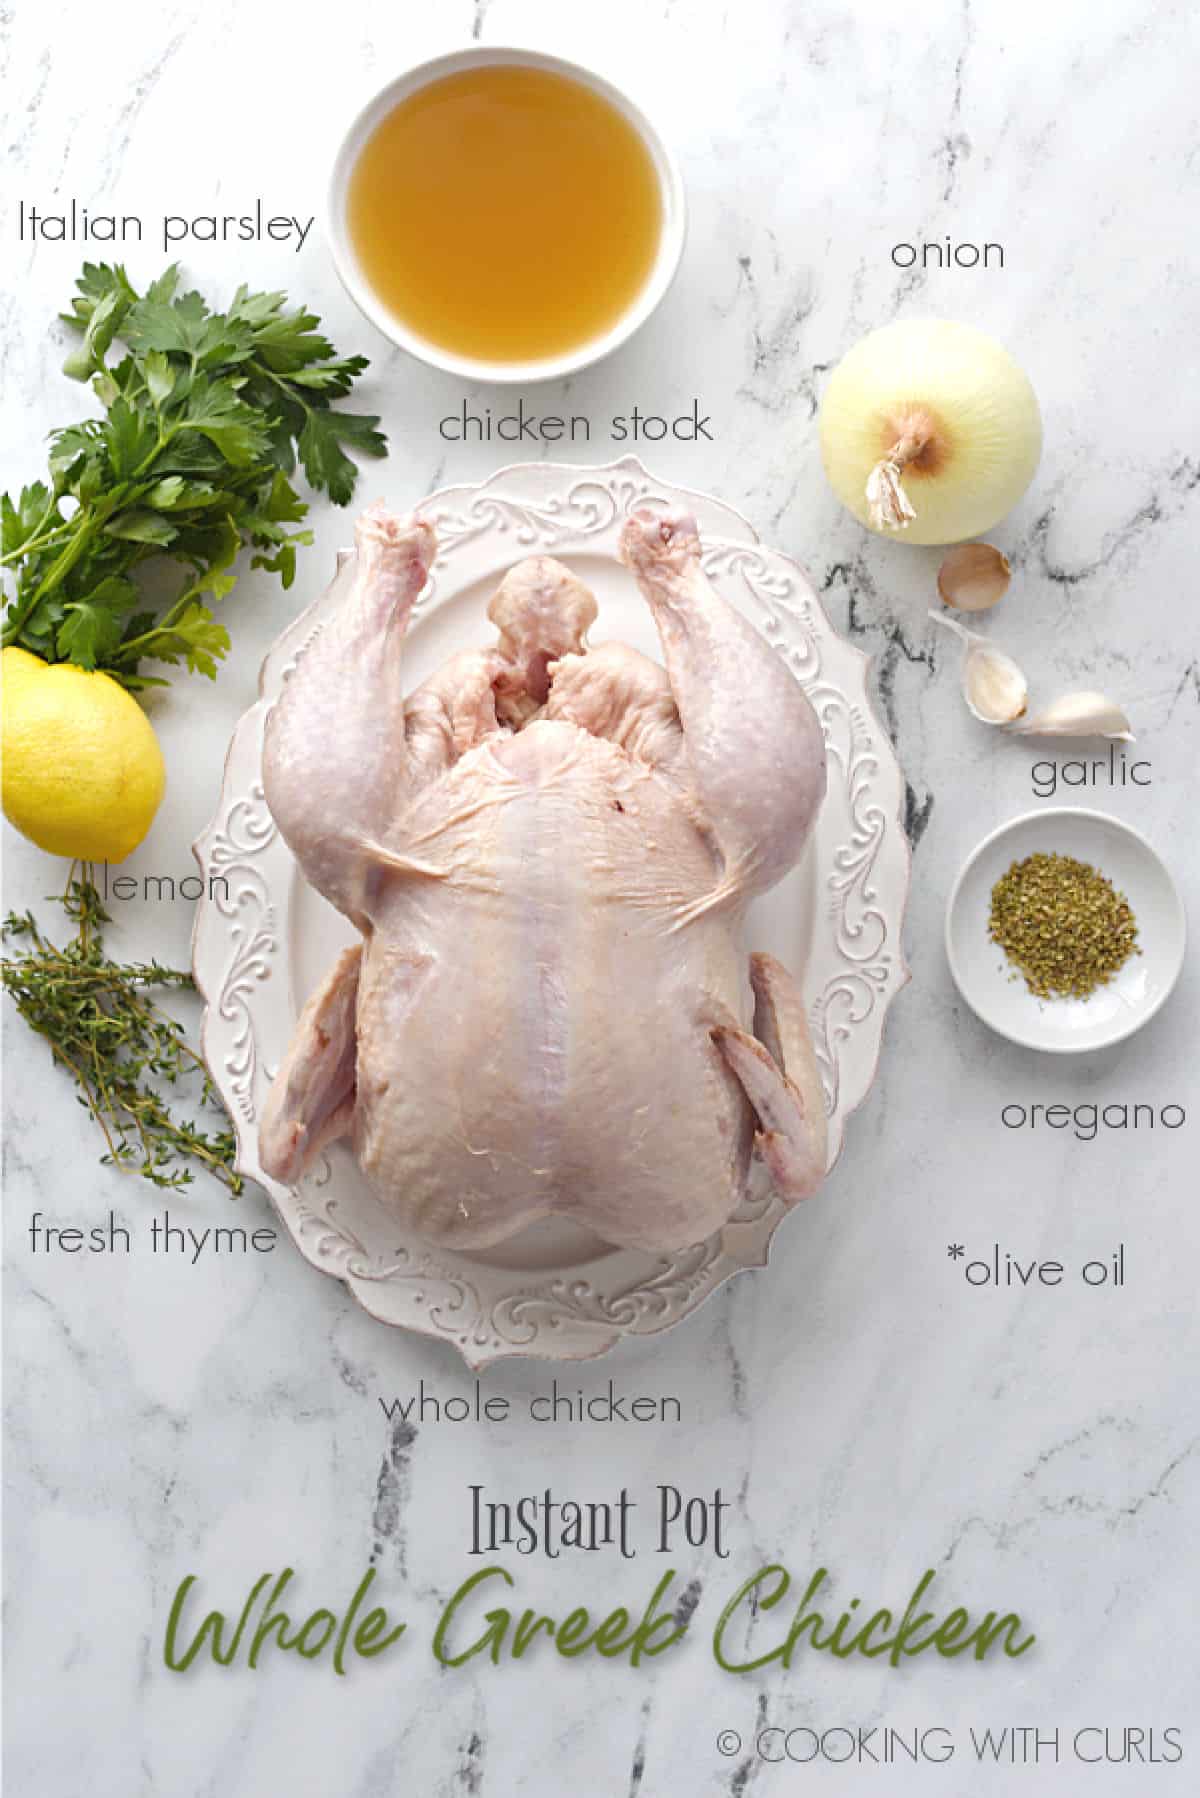 Looking down on a whole chicken on a white platter, Italian parsley, fresh thyme, whole lemon, onion, three garlic cloves, dried oregano and a bowl of chicken stock. 